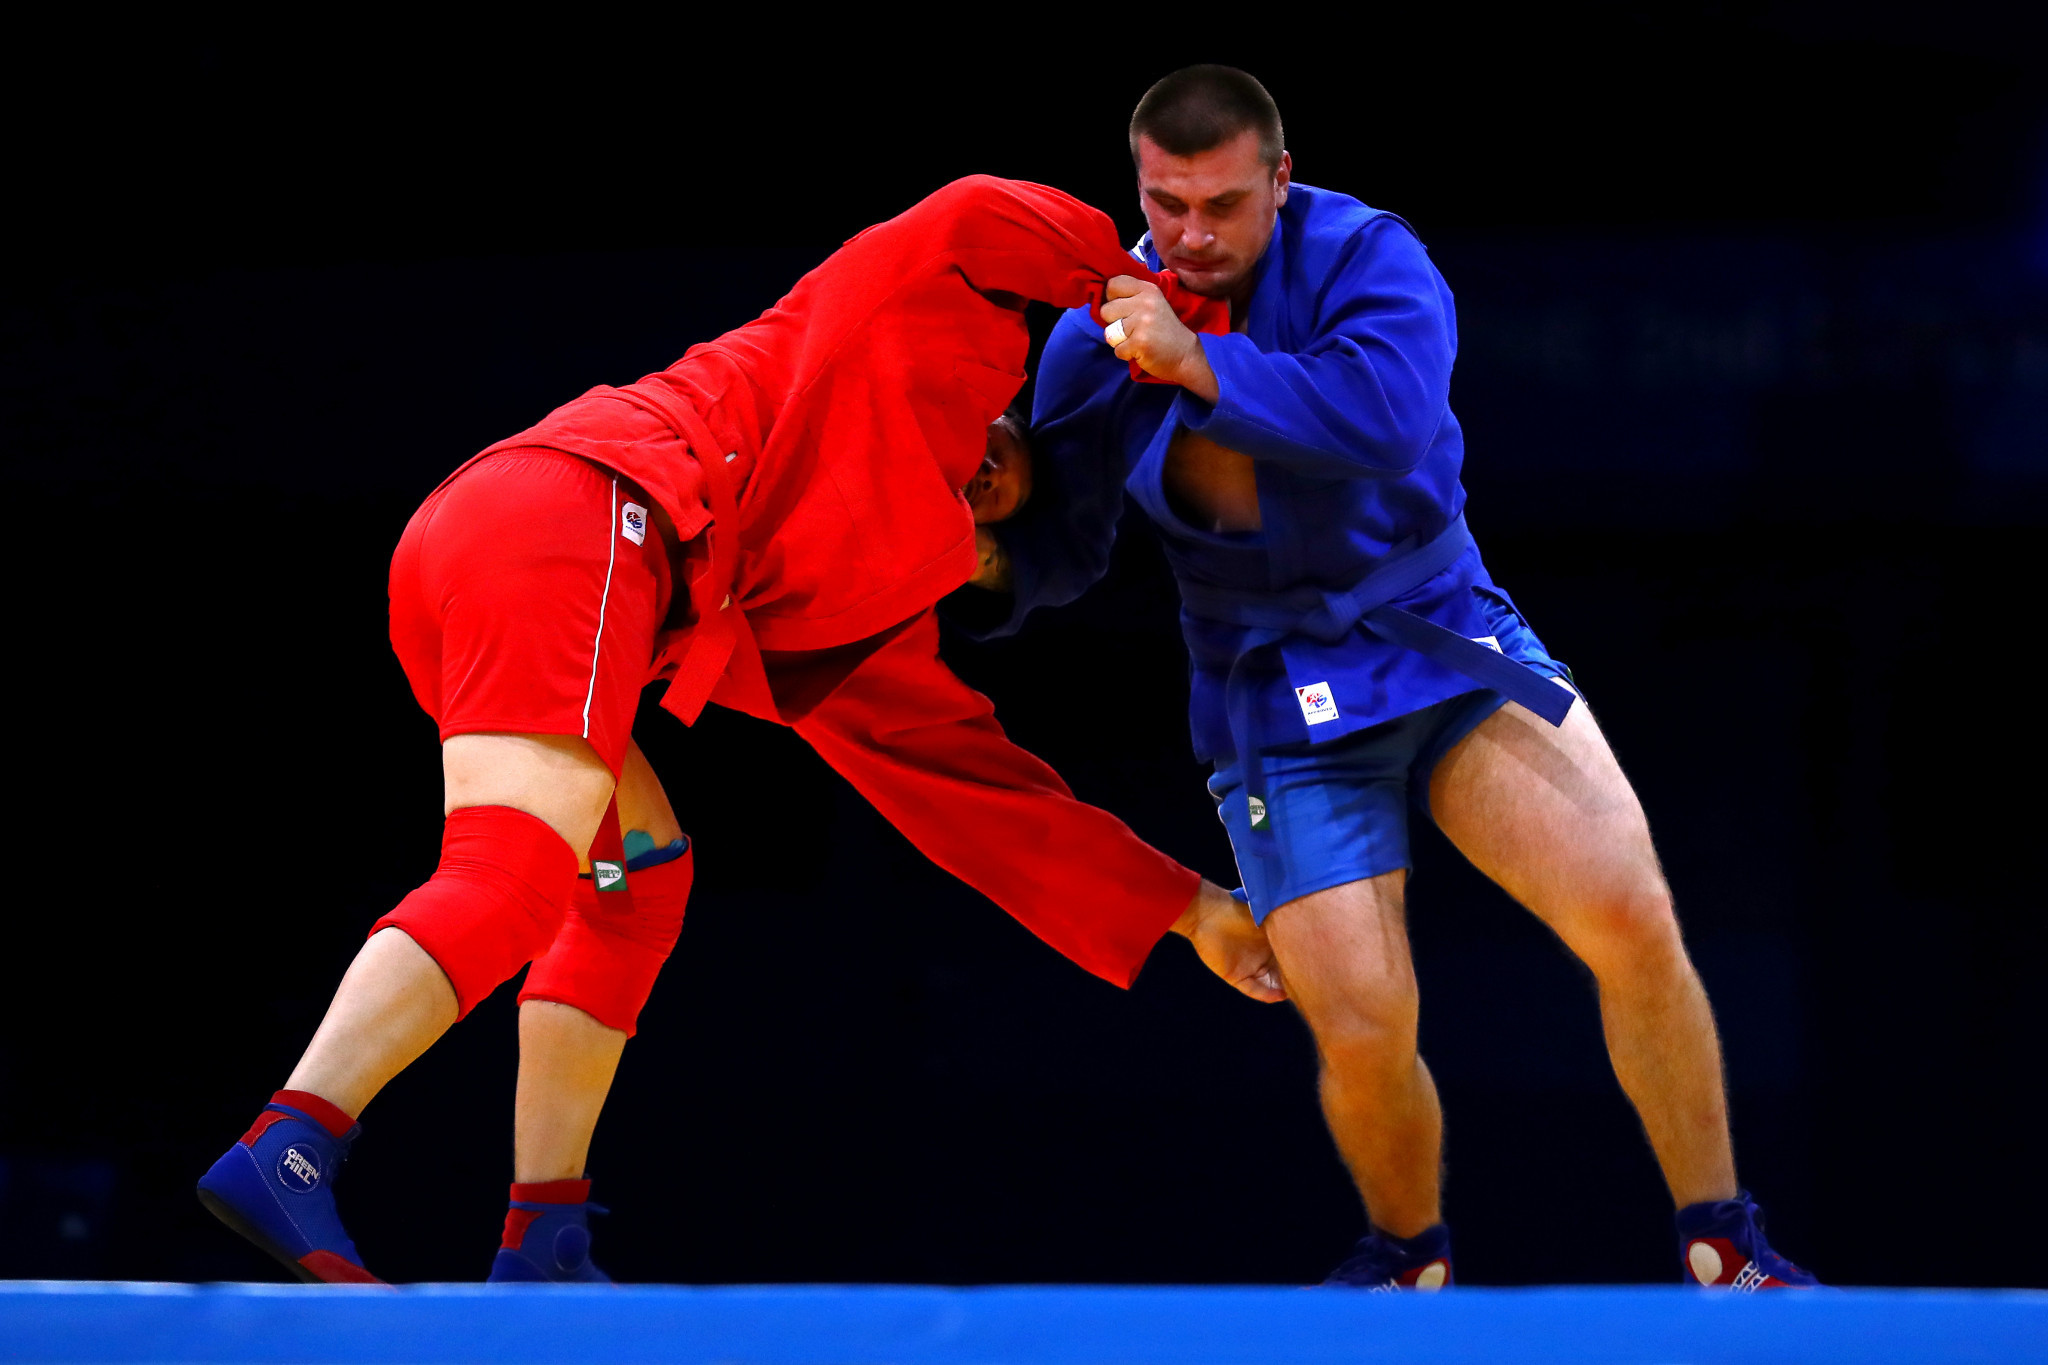 Moldova's only silver medal at the 2019 European Games was in sambo ©Getty Images